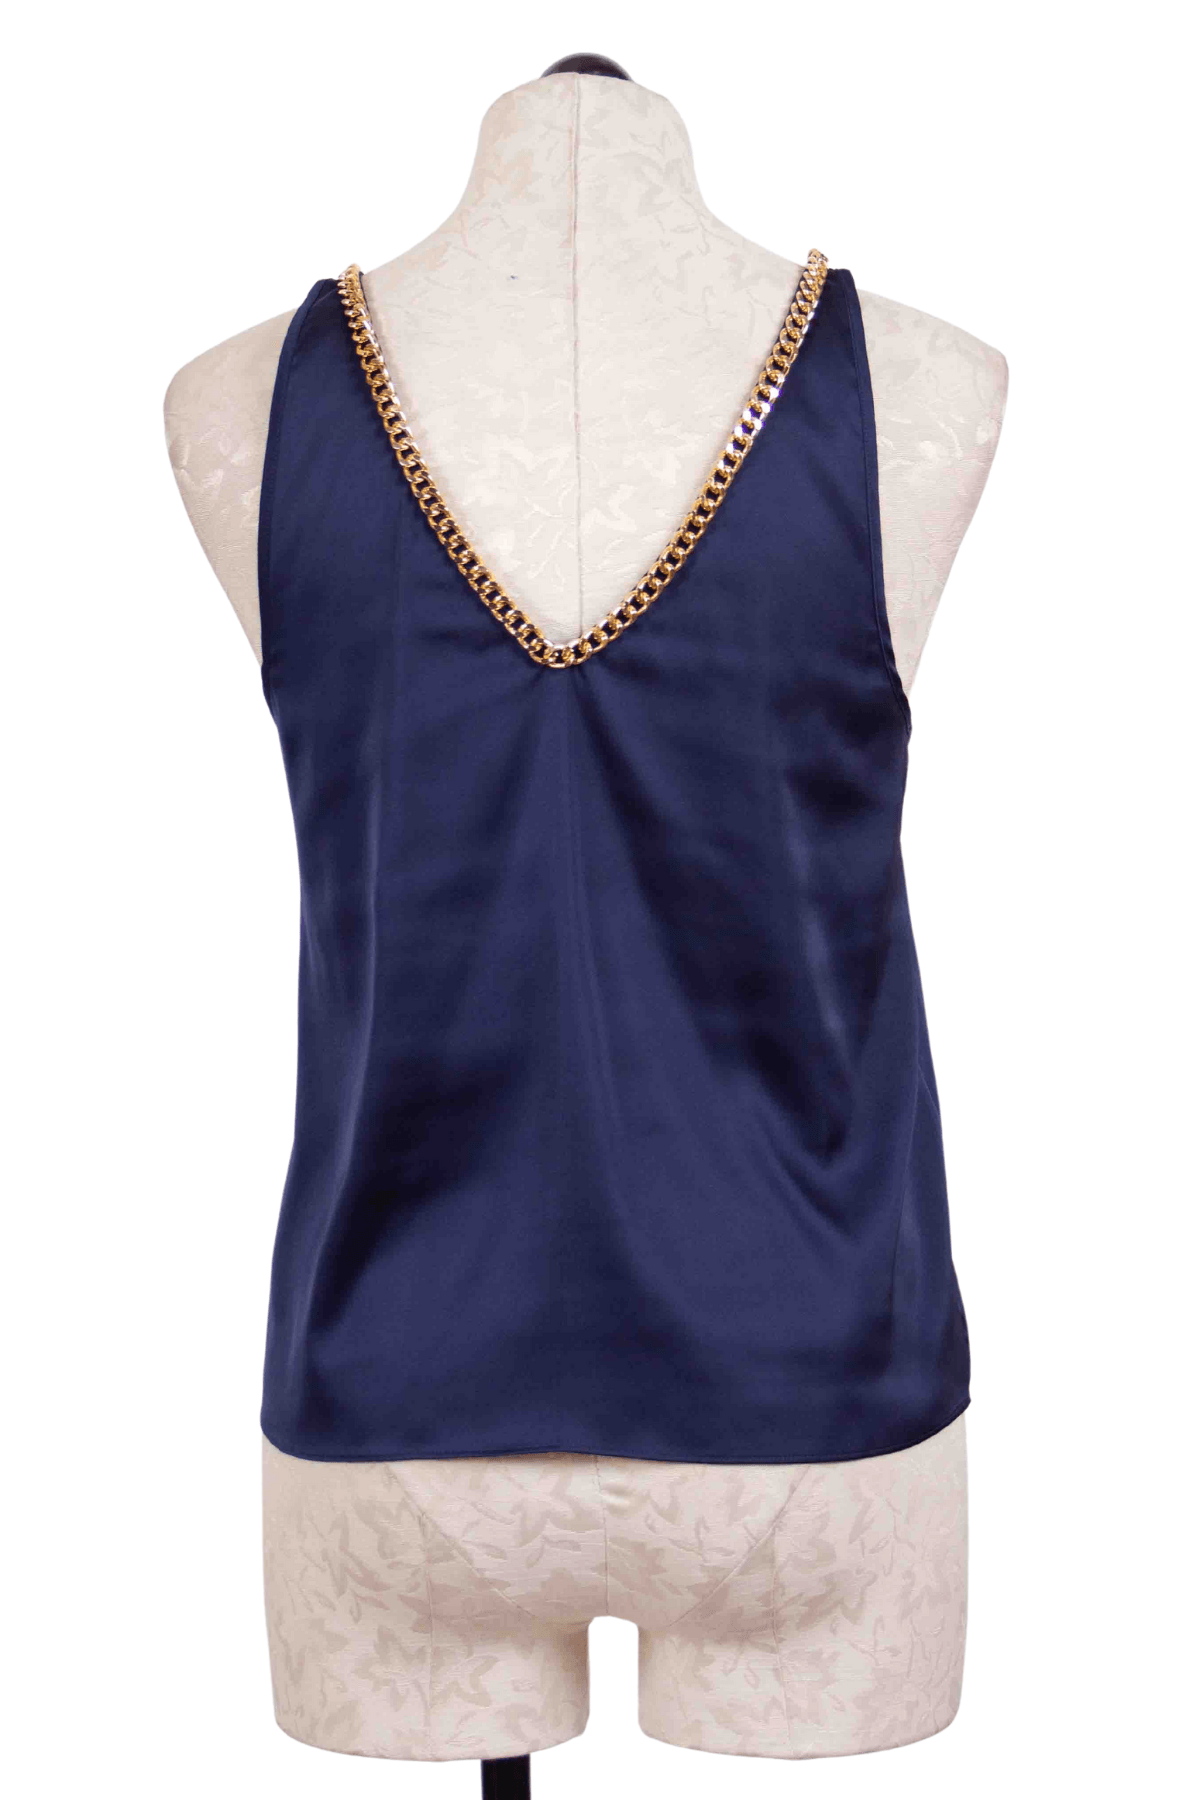 back view of Navy Dallas Chain Tank by Generation Love